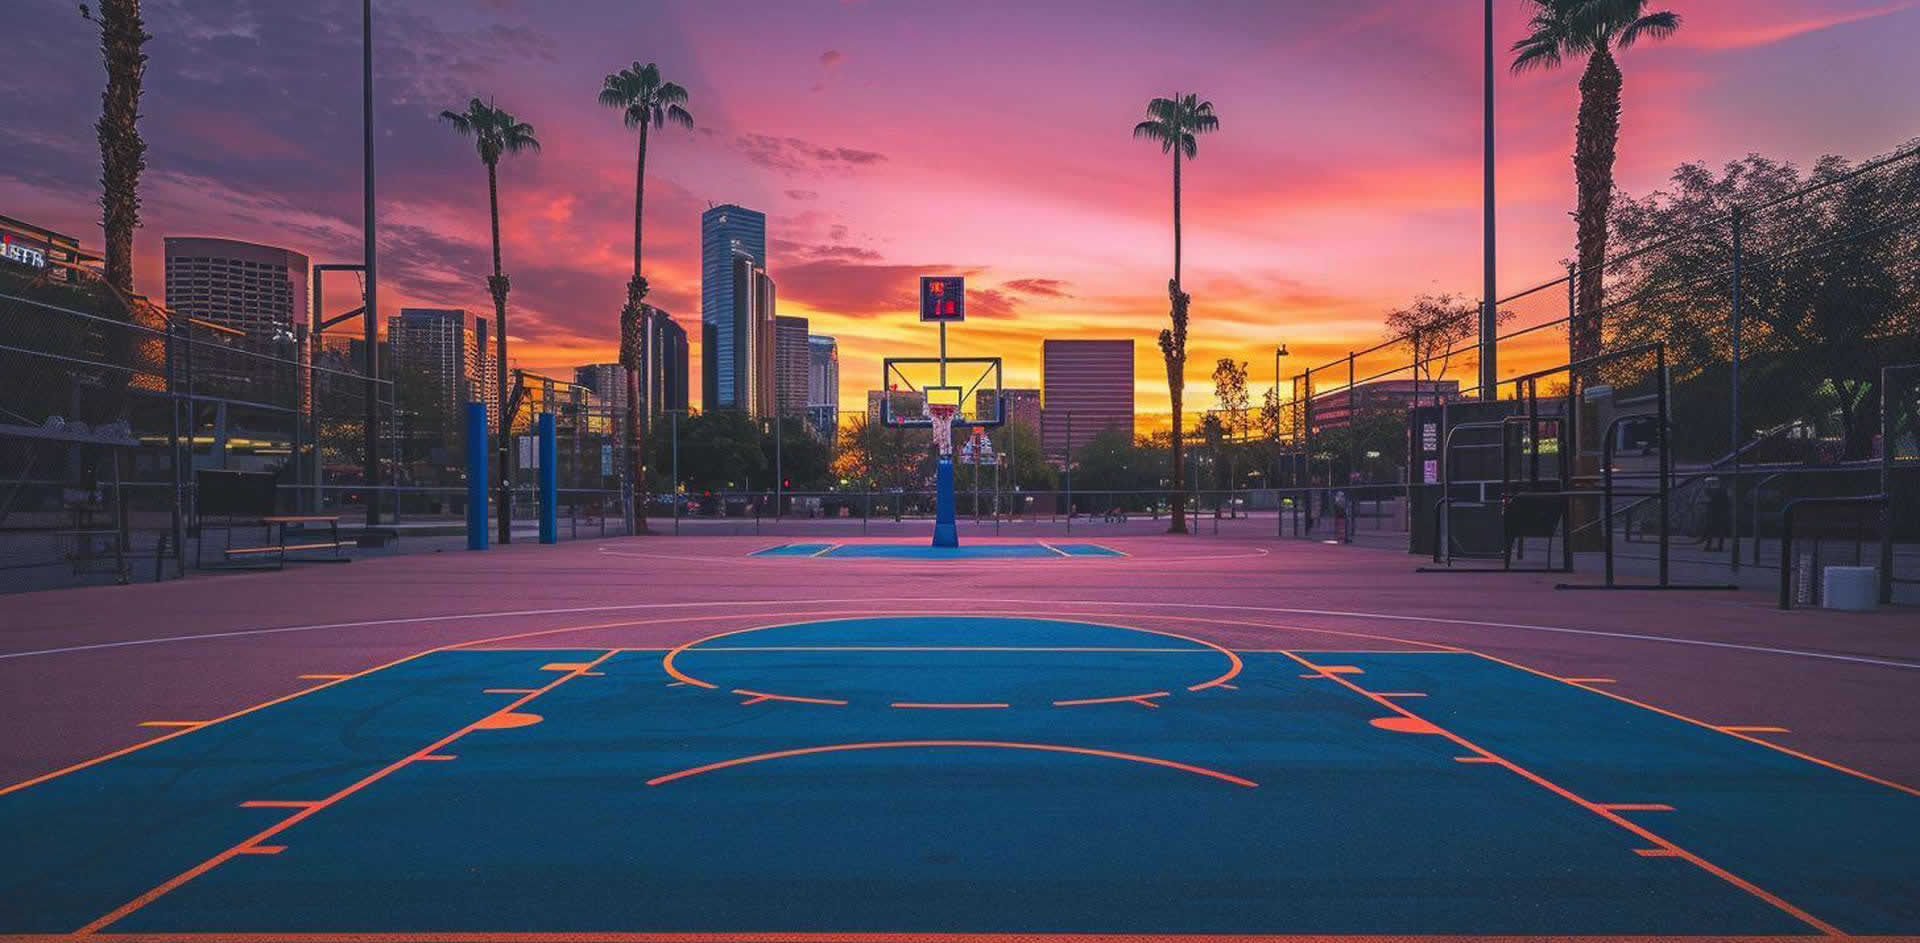 A basketball court with a city in the background